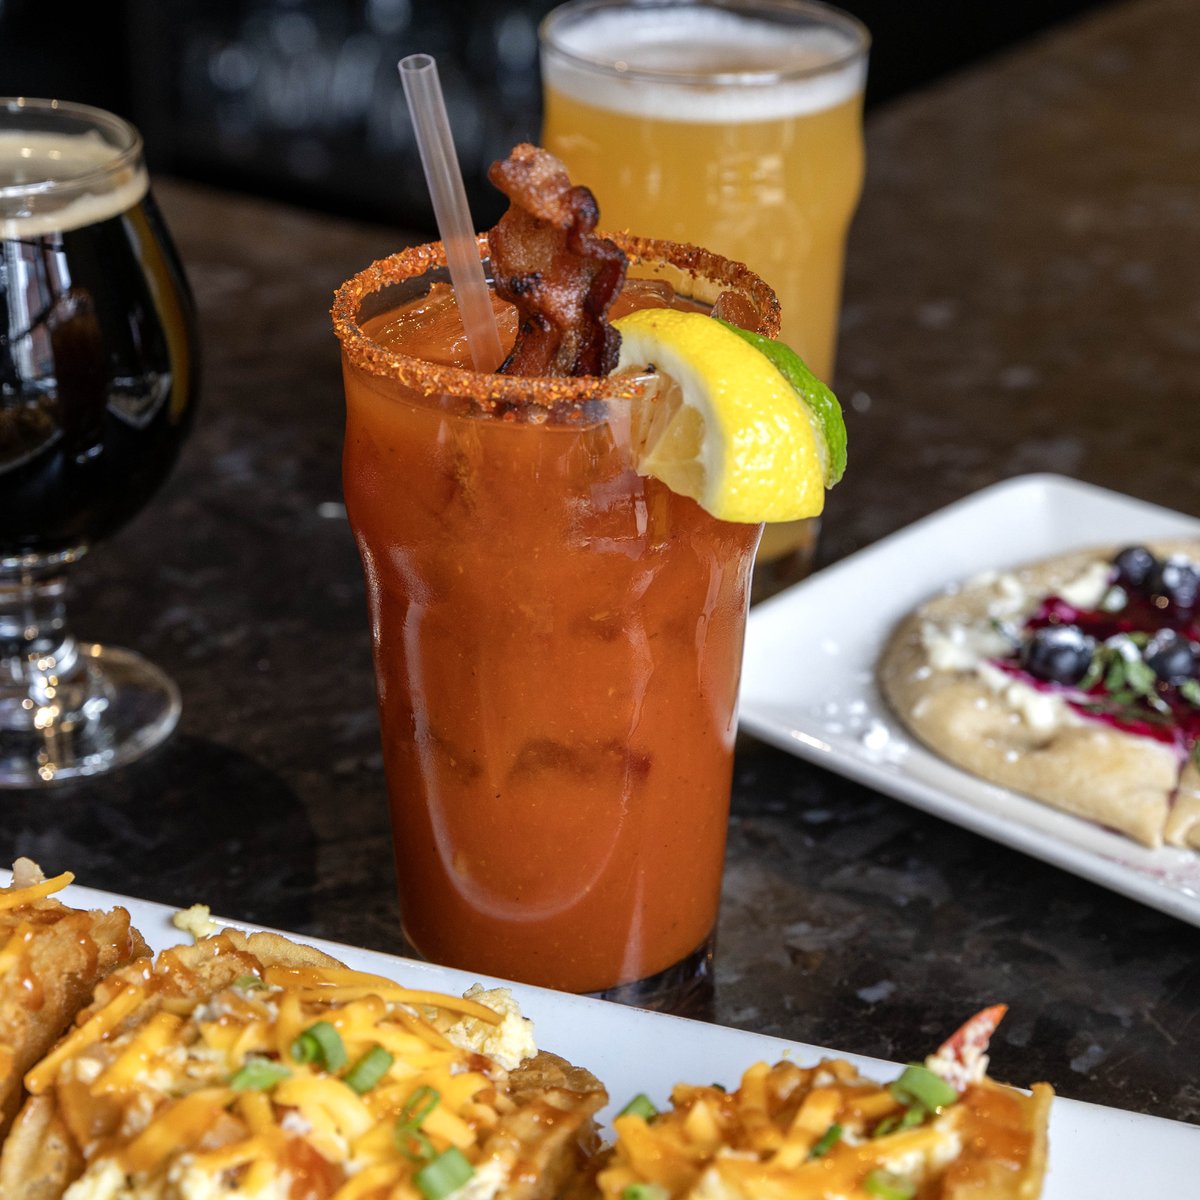 It’s Eclipse Weekend and we’ve got tasty new Sunday Brunch specials for April. PLUS today is National Beer Day and we’ve got 15+ beers on tap. Seems like a great day to stop by the tap room! Open 10AM to 8PM today (Brunch menu until 2) Open 11AM to 10PM Monday for Eclipse Day!